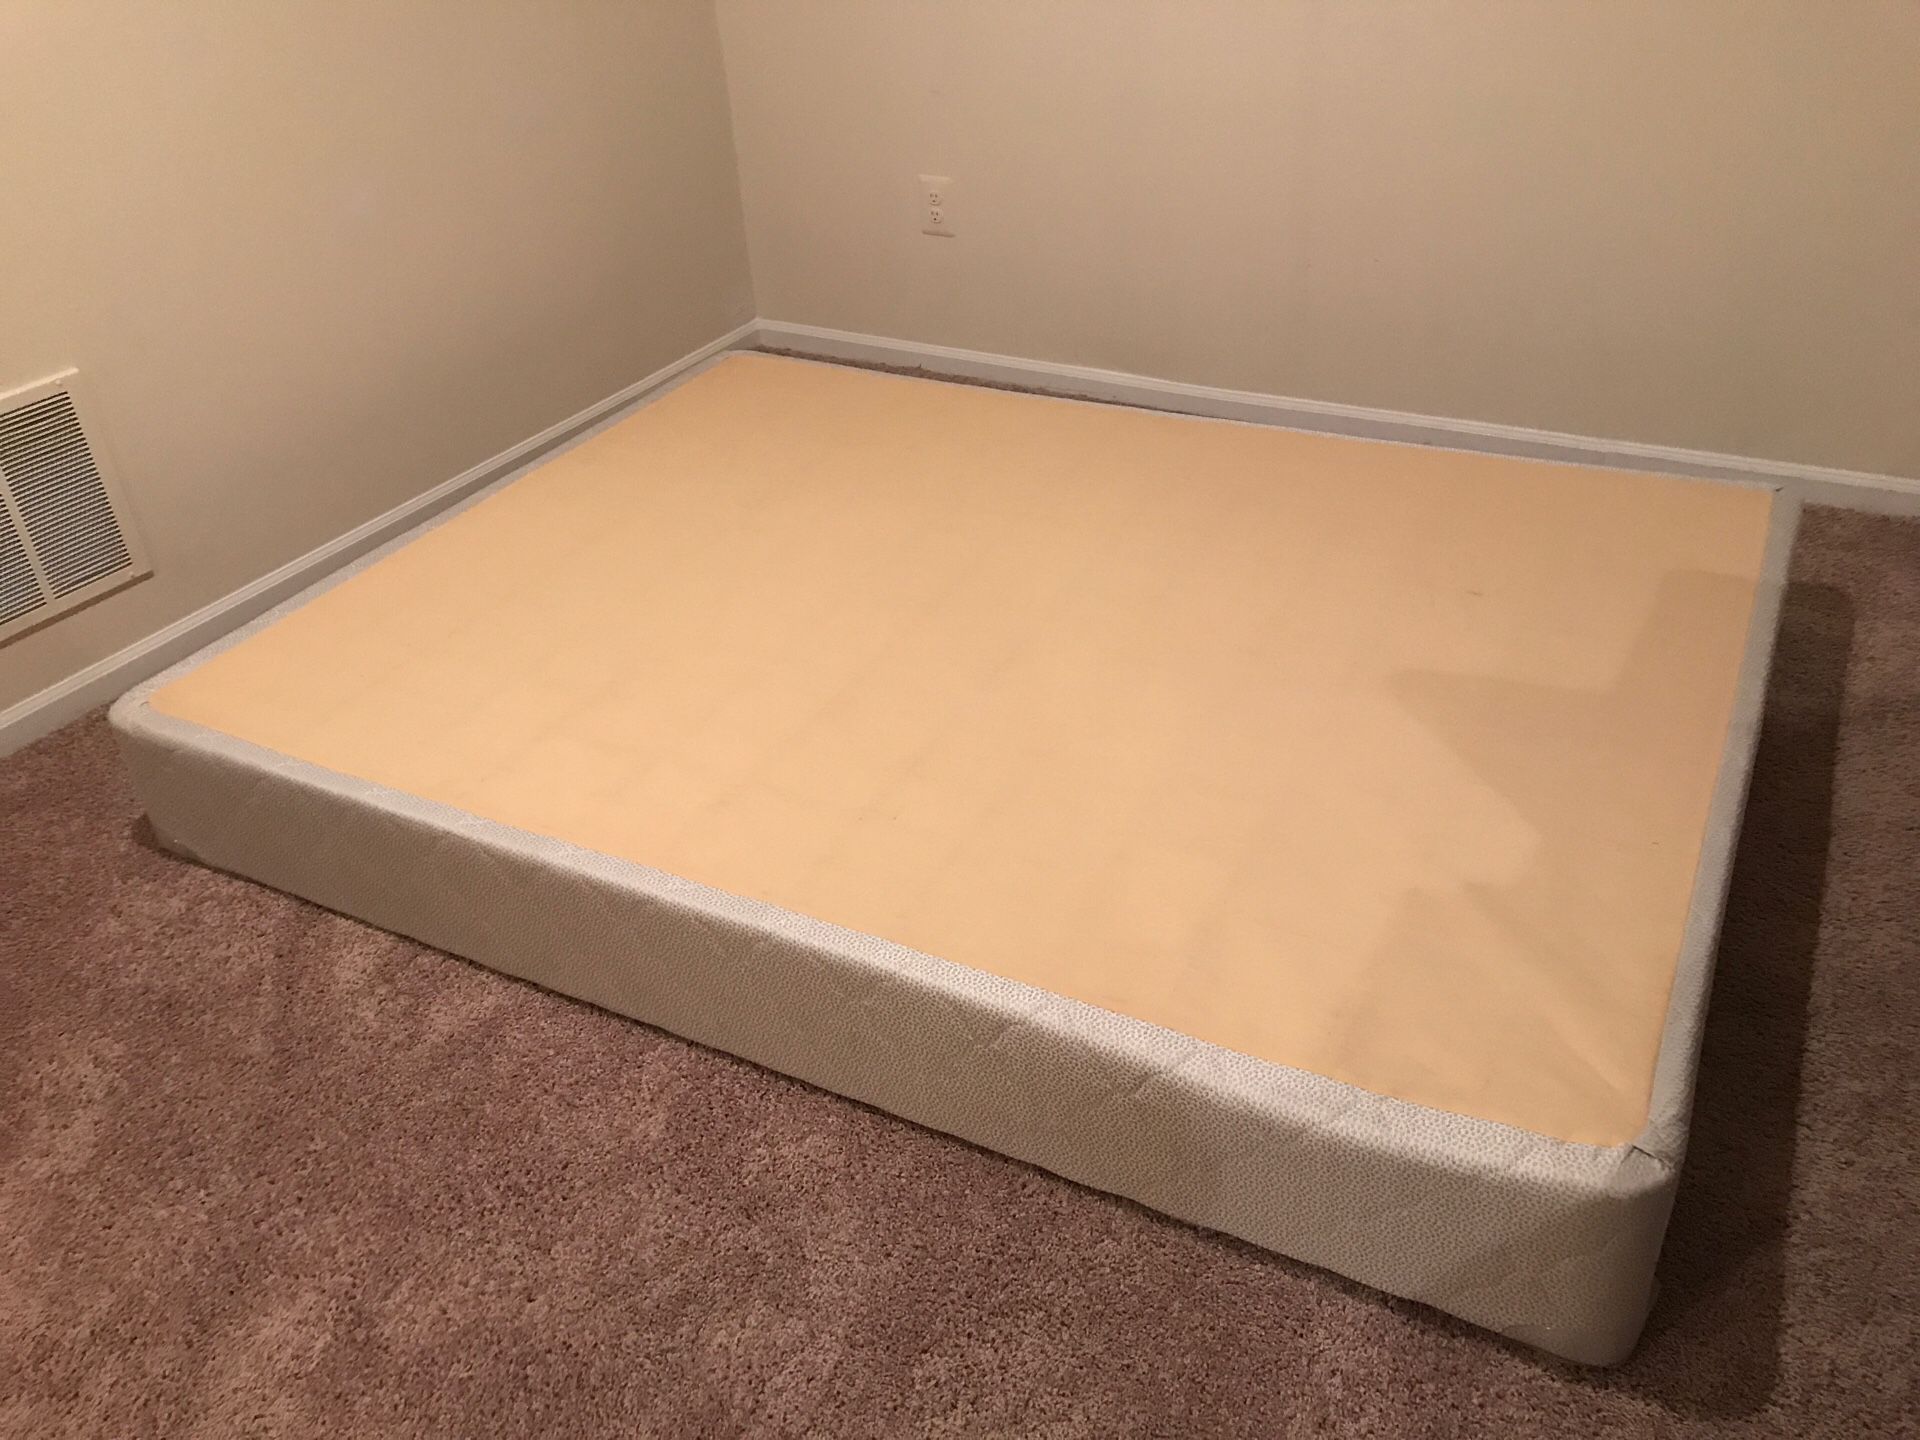 Queen size box spring in perfect condition